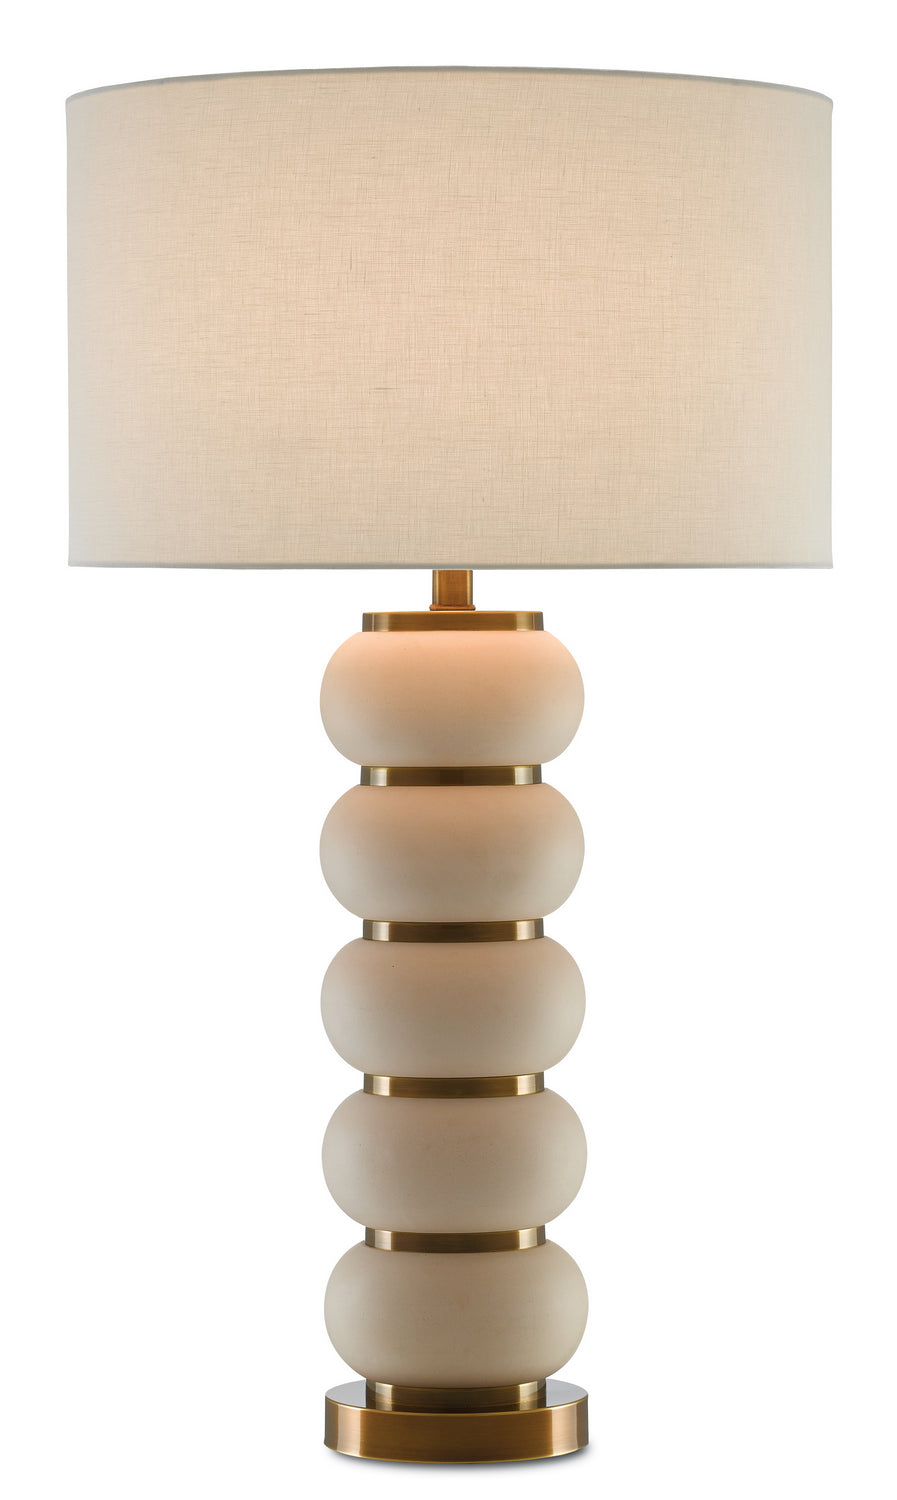 One Light Table Lamp from the Luko collection in White Mud/Antique Brass finish